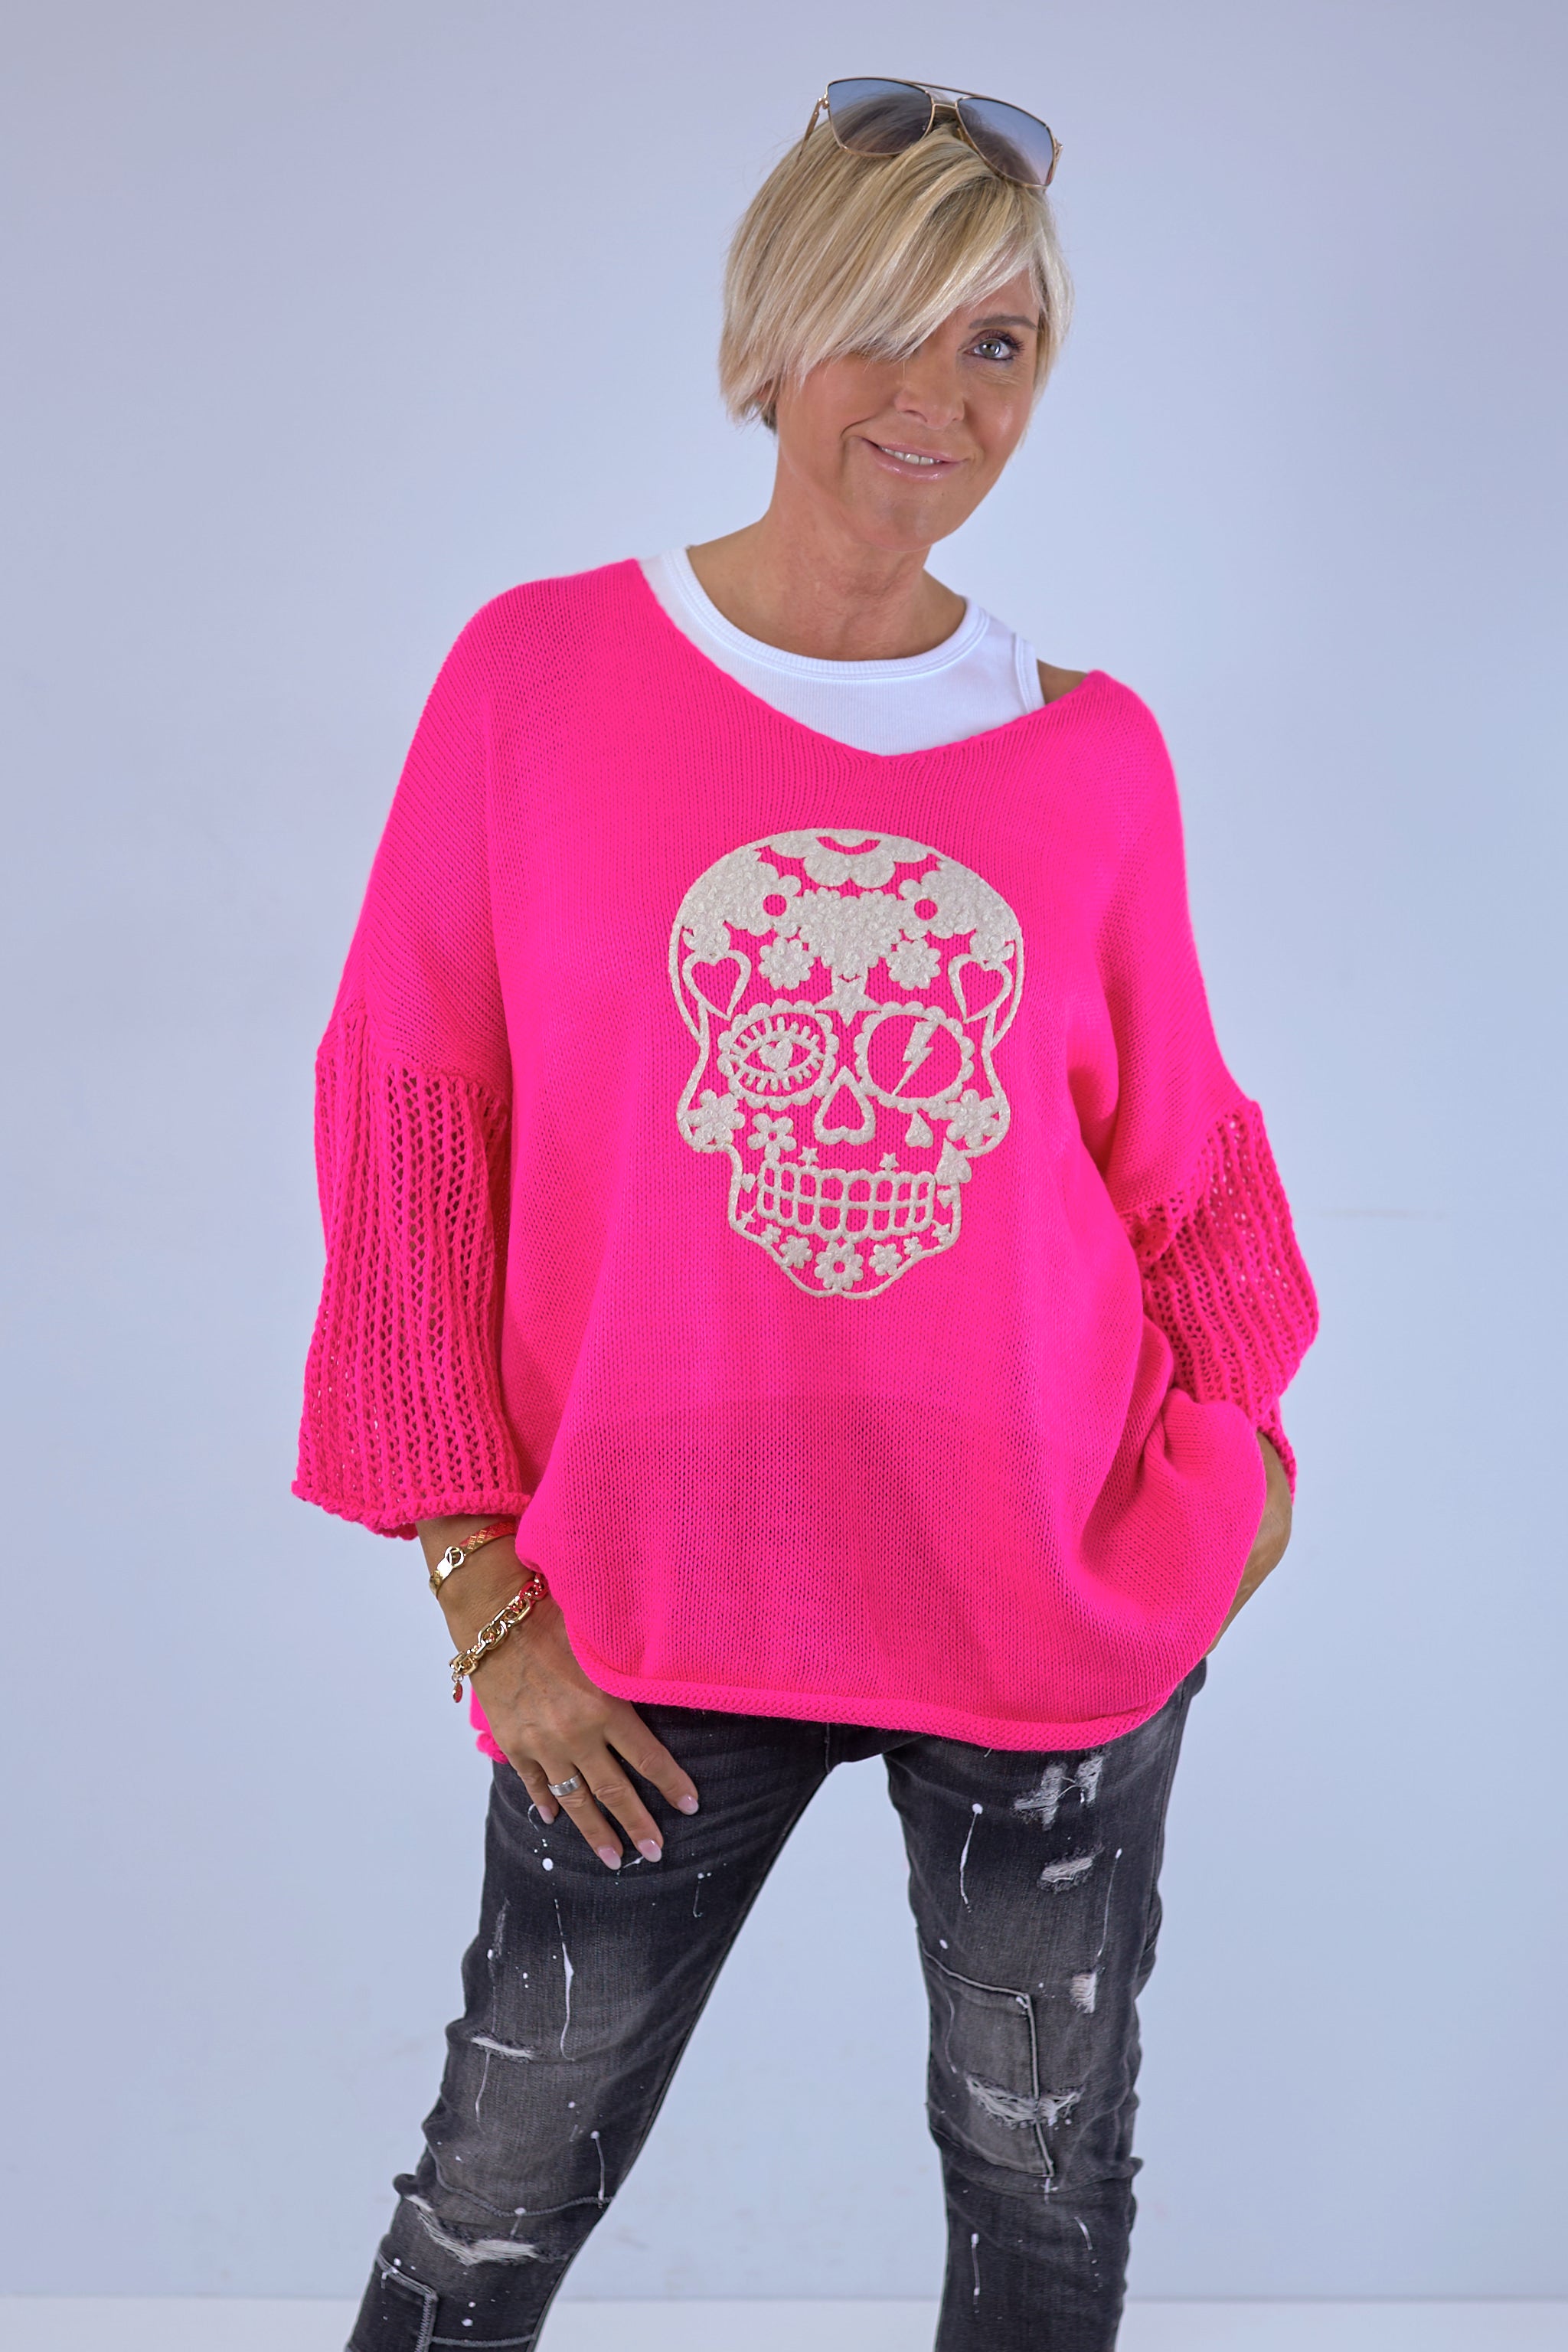 Knitted sweater "Skull", pink